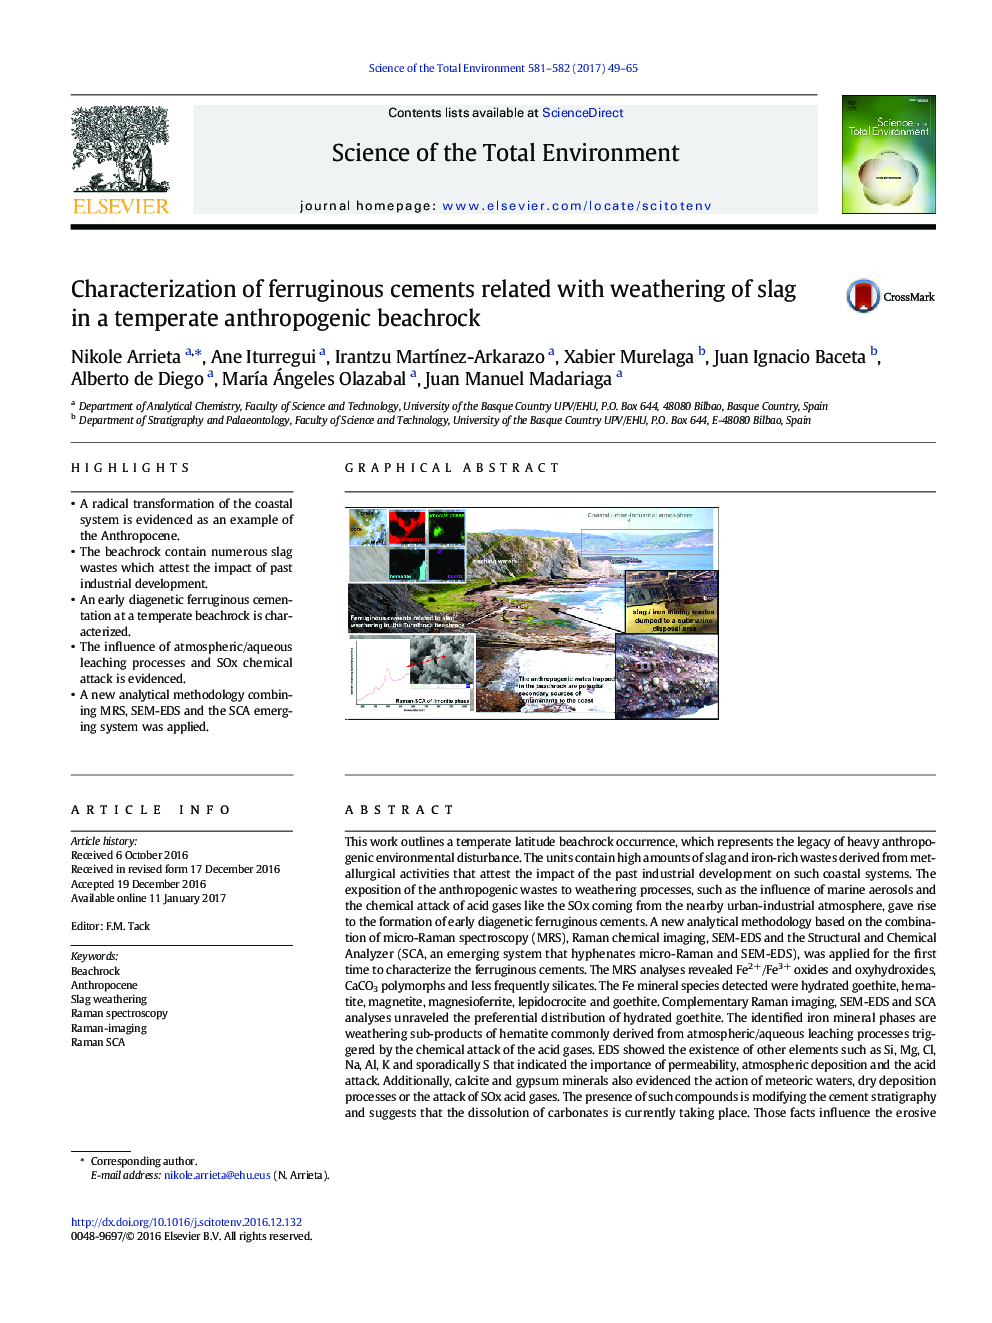 Characterization of ferruginous cements related with weathering of slag in a temperate anthropogenic beachrock